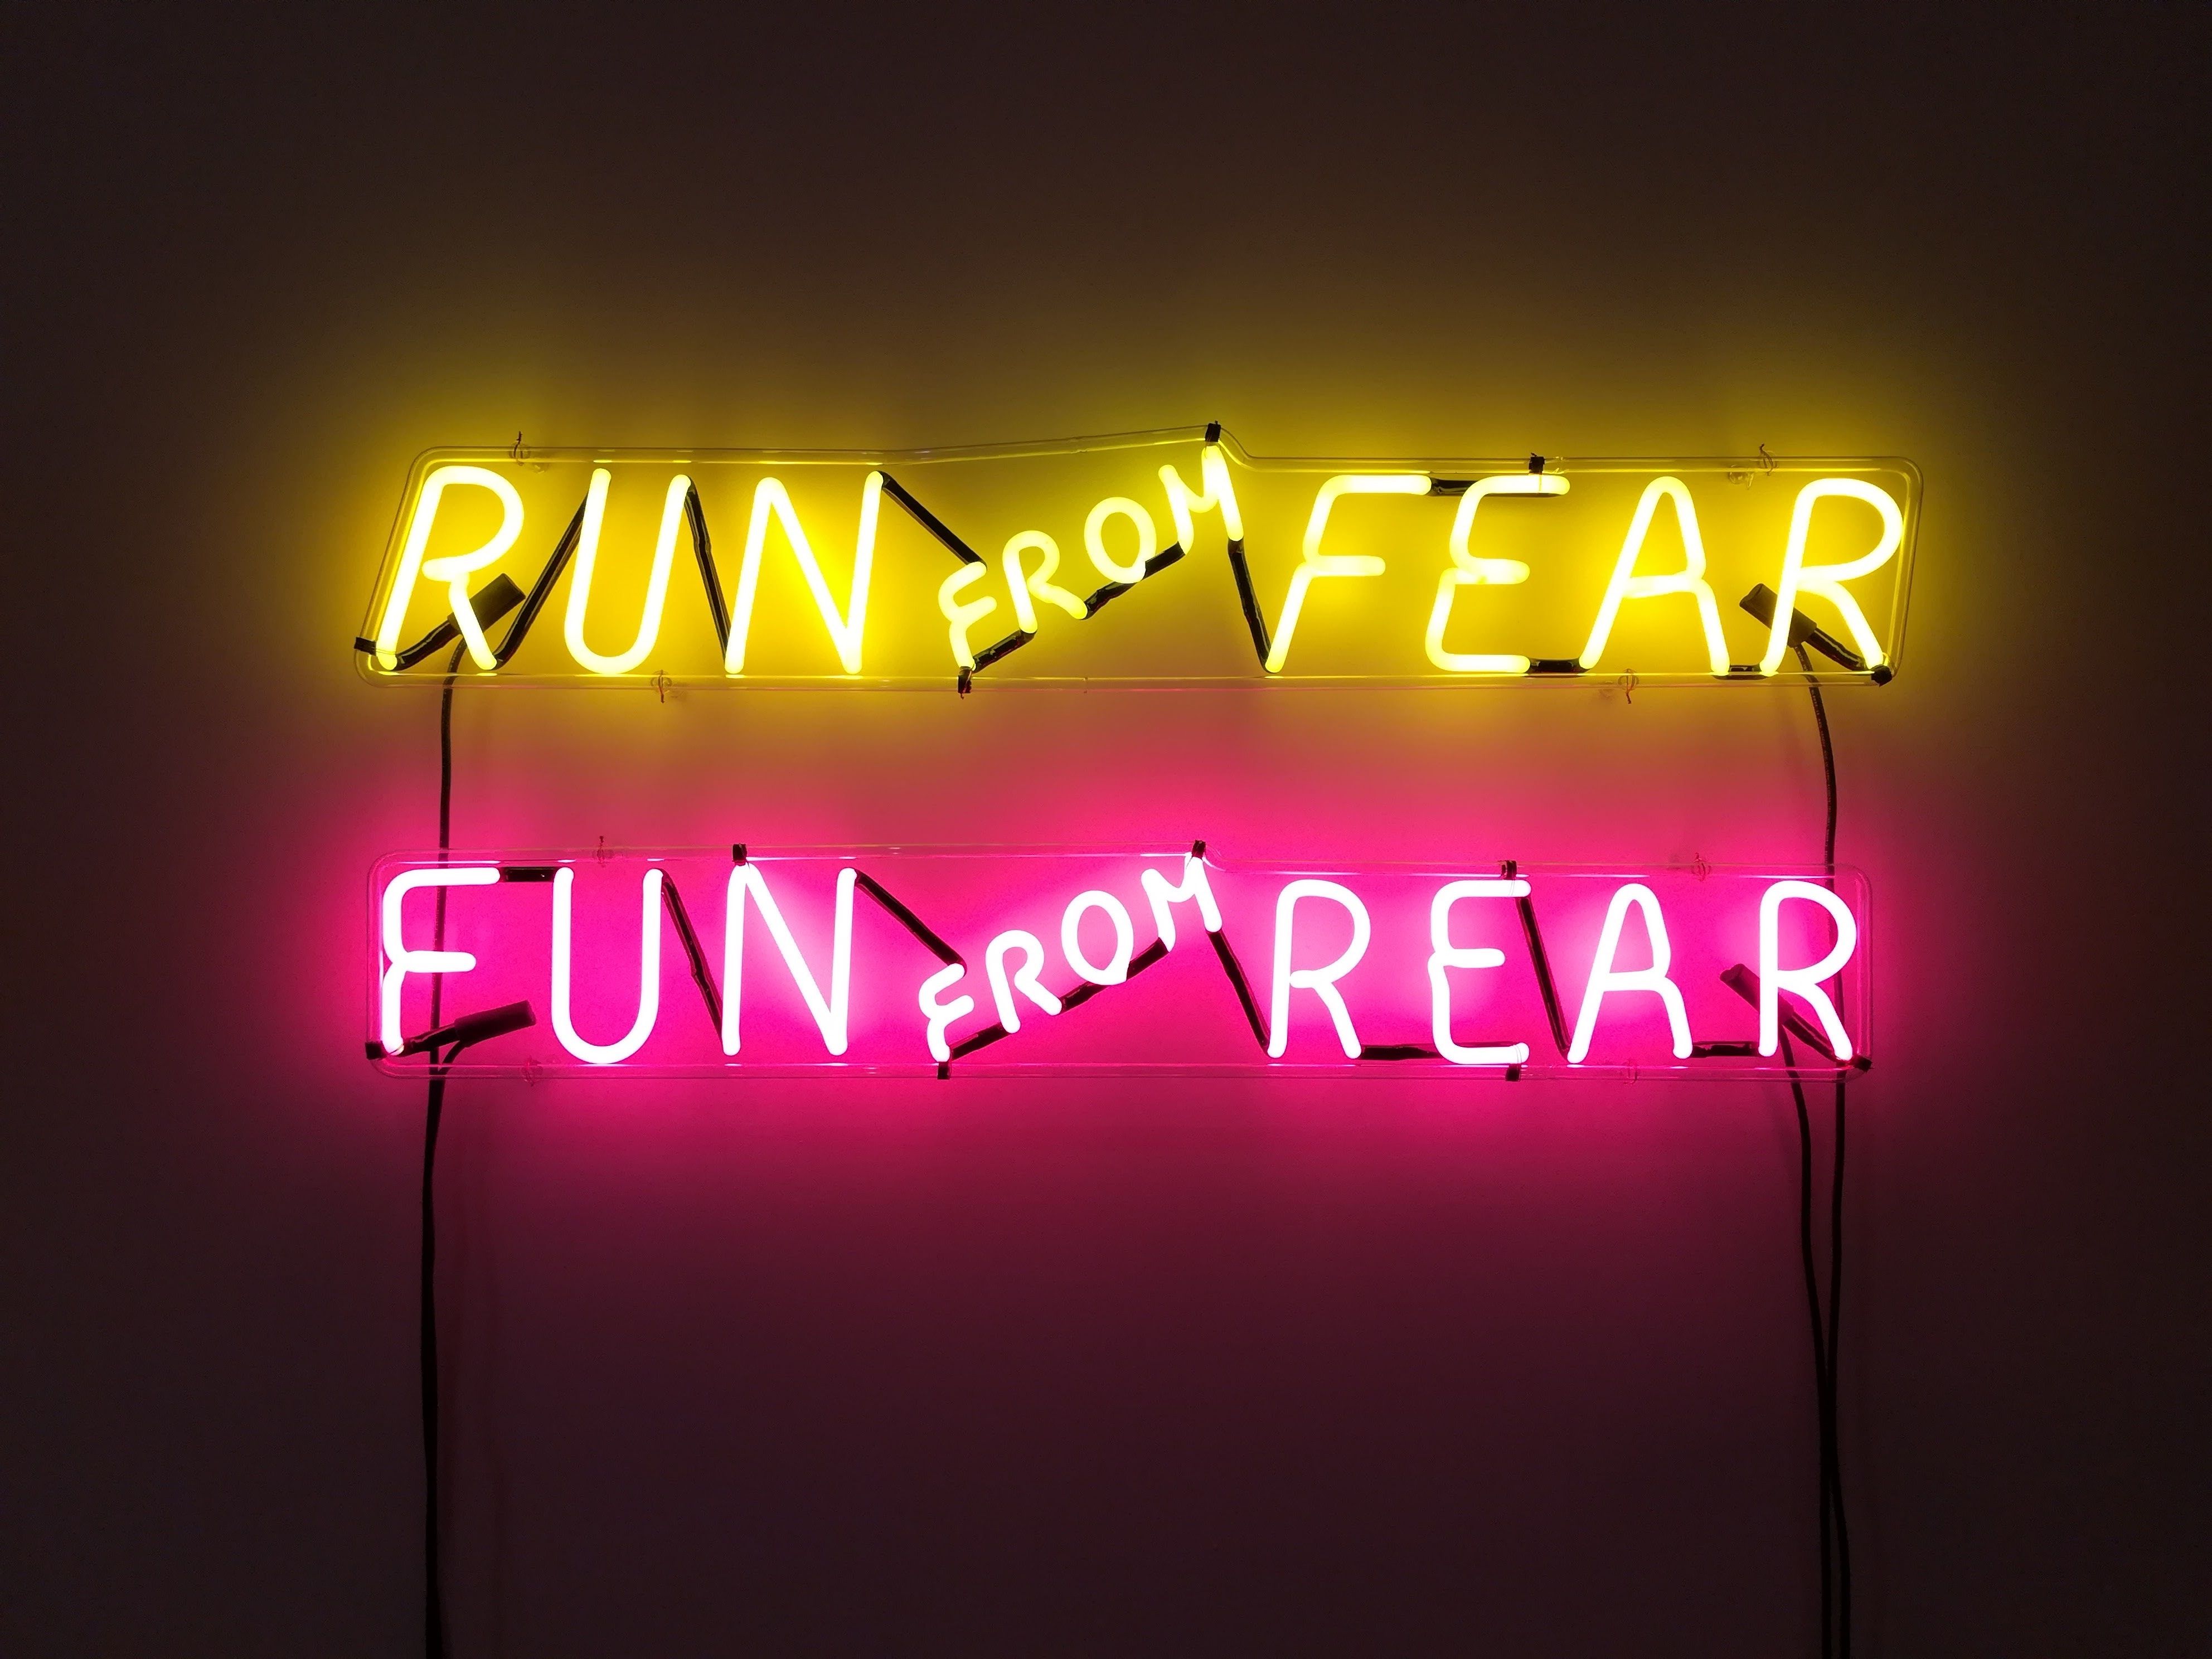 3968x2976 #text, #fun, #real, #wall sign, #rear, #yellow neon, #funny wallpaper, #type, #pink neon, #yellow, #run, #wall art, #typography, #PNG image, #fear, #neon sign, #pink, #sign, #funny background, #neon light, #wallpaper